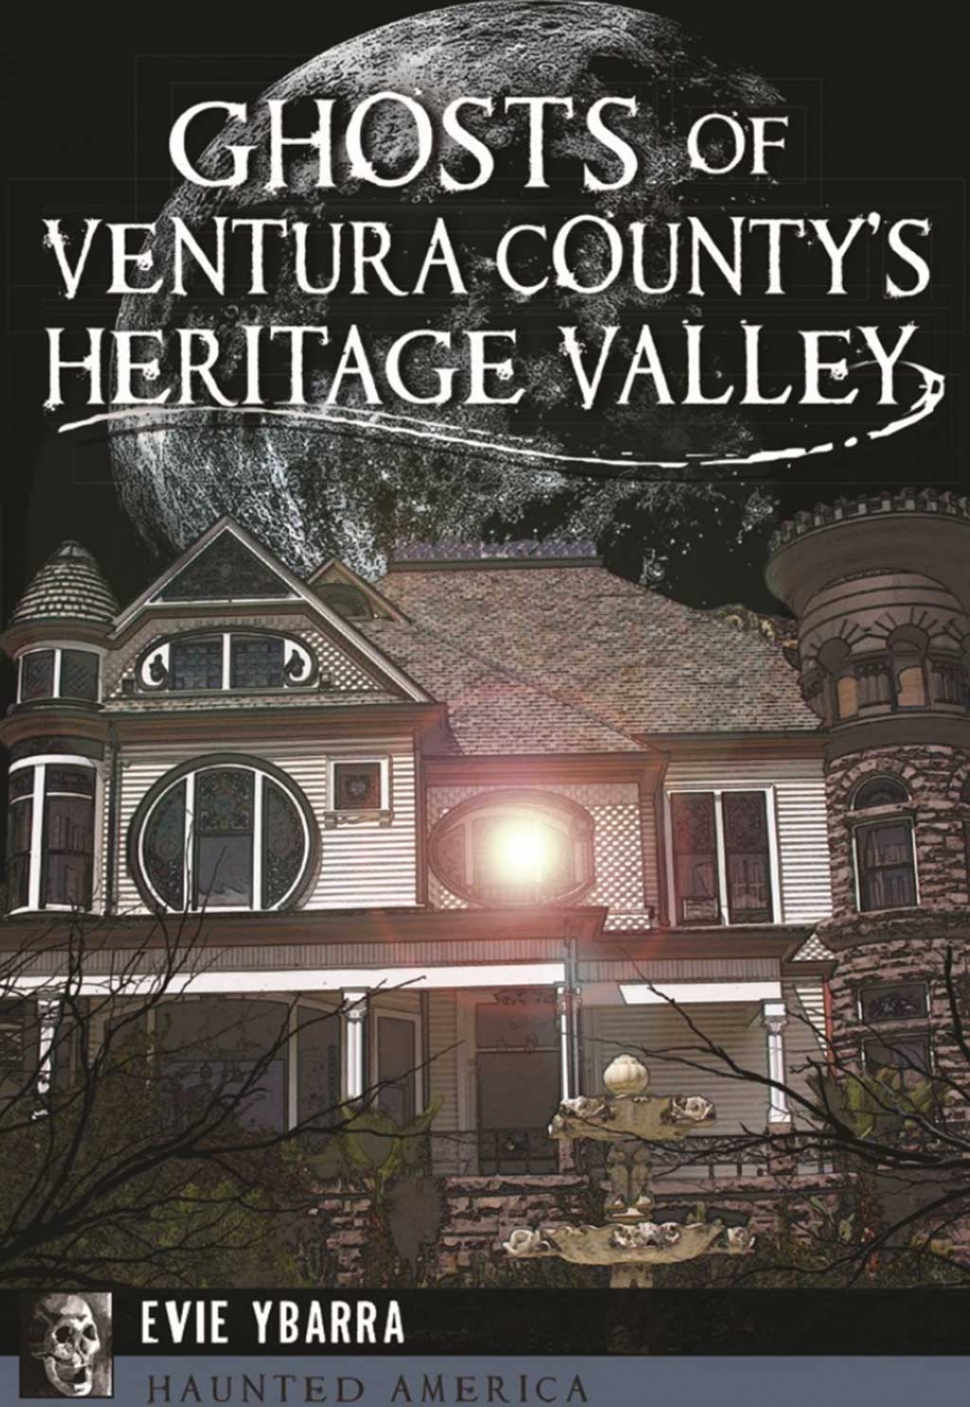 Fillmore Historical Museum will be hosting a book signing on September 28th at 3pm-5pm. The book is about many of the tales, legends and hauntings in the Heritage Valley. Stories about Fillmore, Rancho Sespe, Santa Paula and Piru are included. The title is GHOSTS OF VENTURA COUNTY’S HERITAGE VALLEY, written by Evie Ybarra.